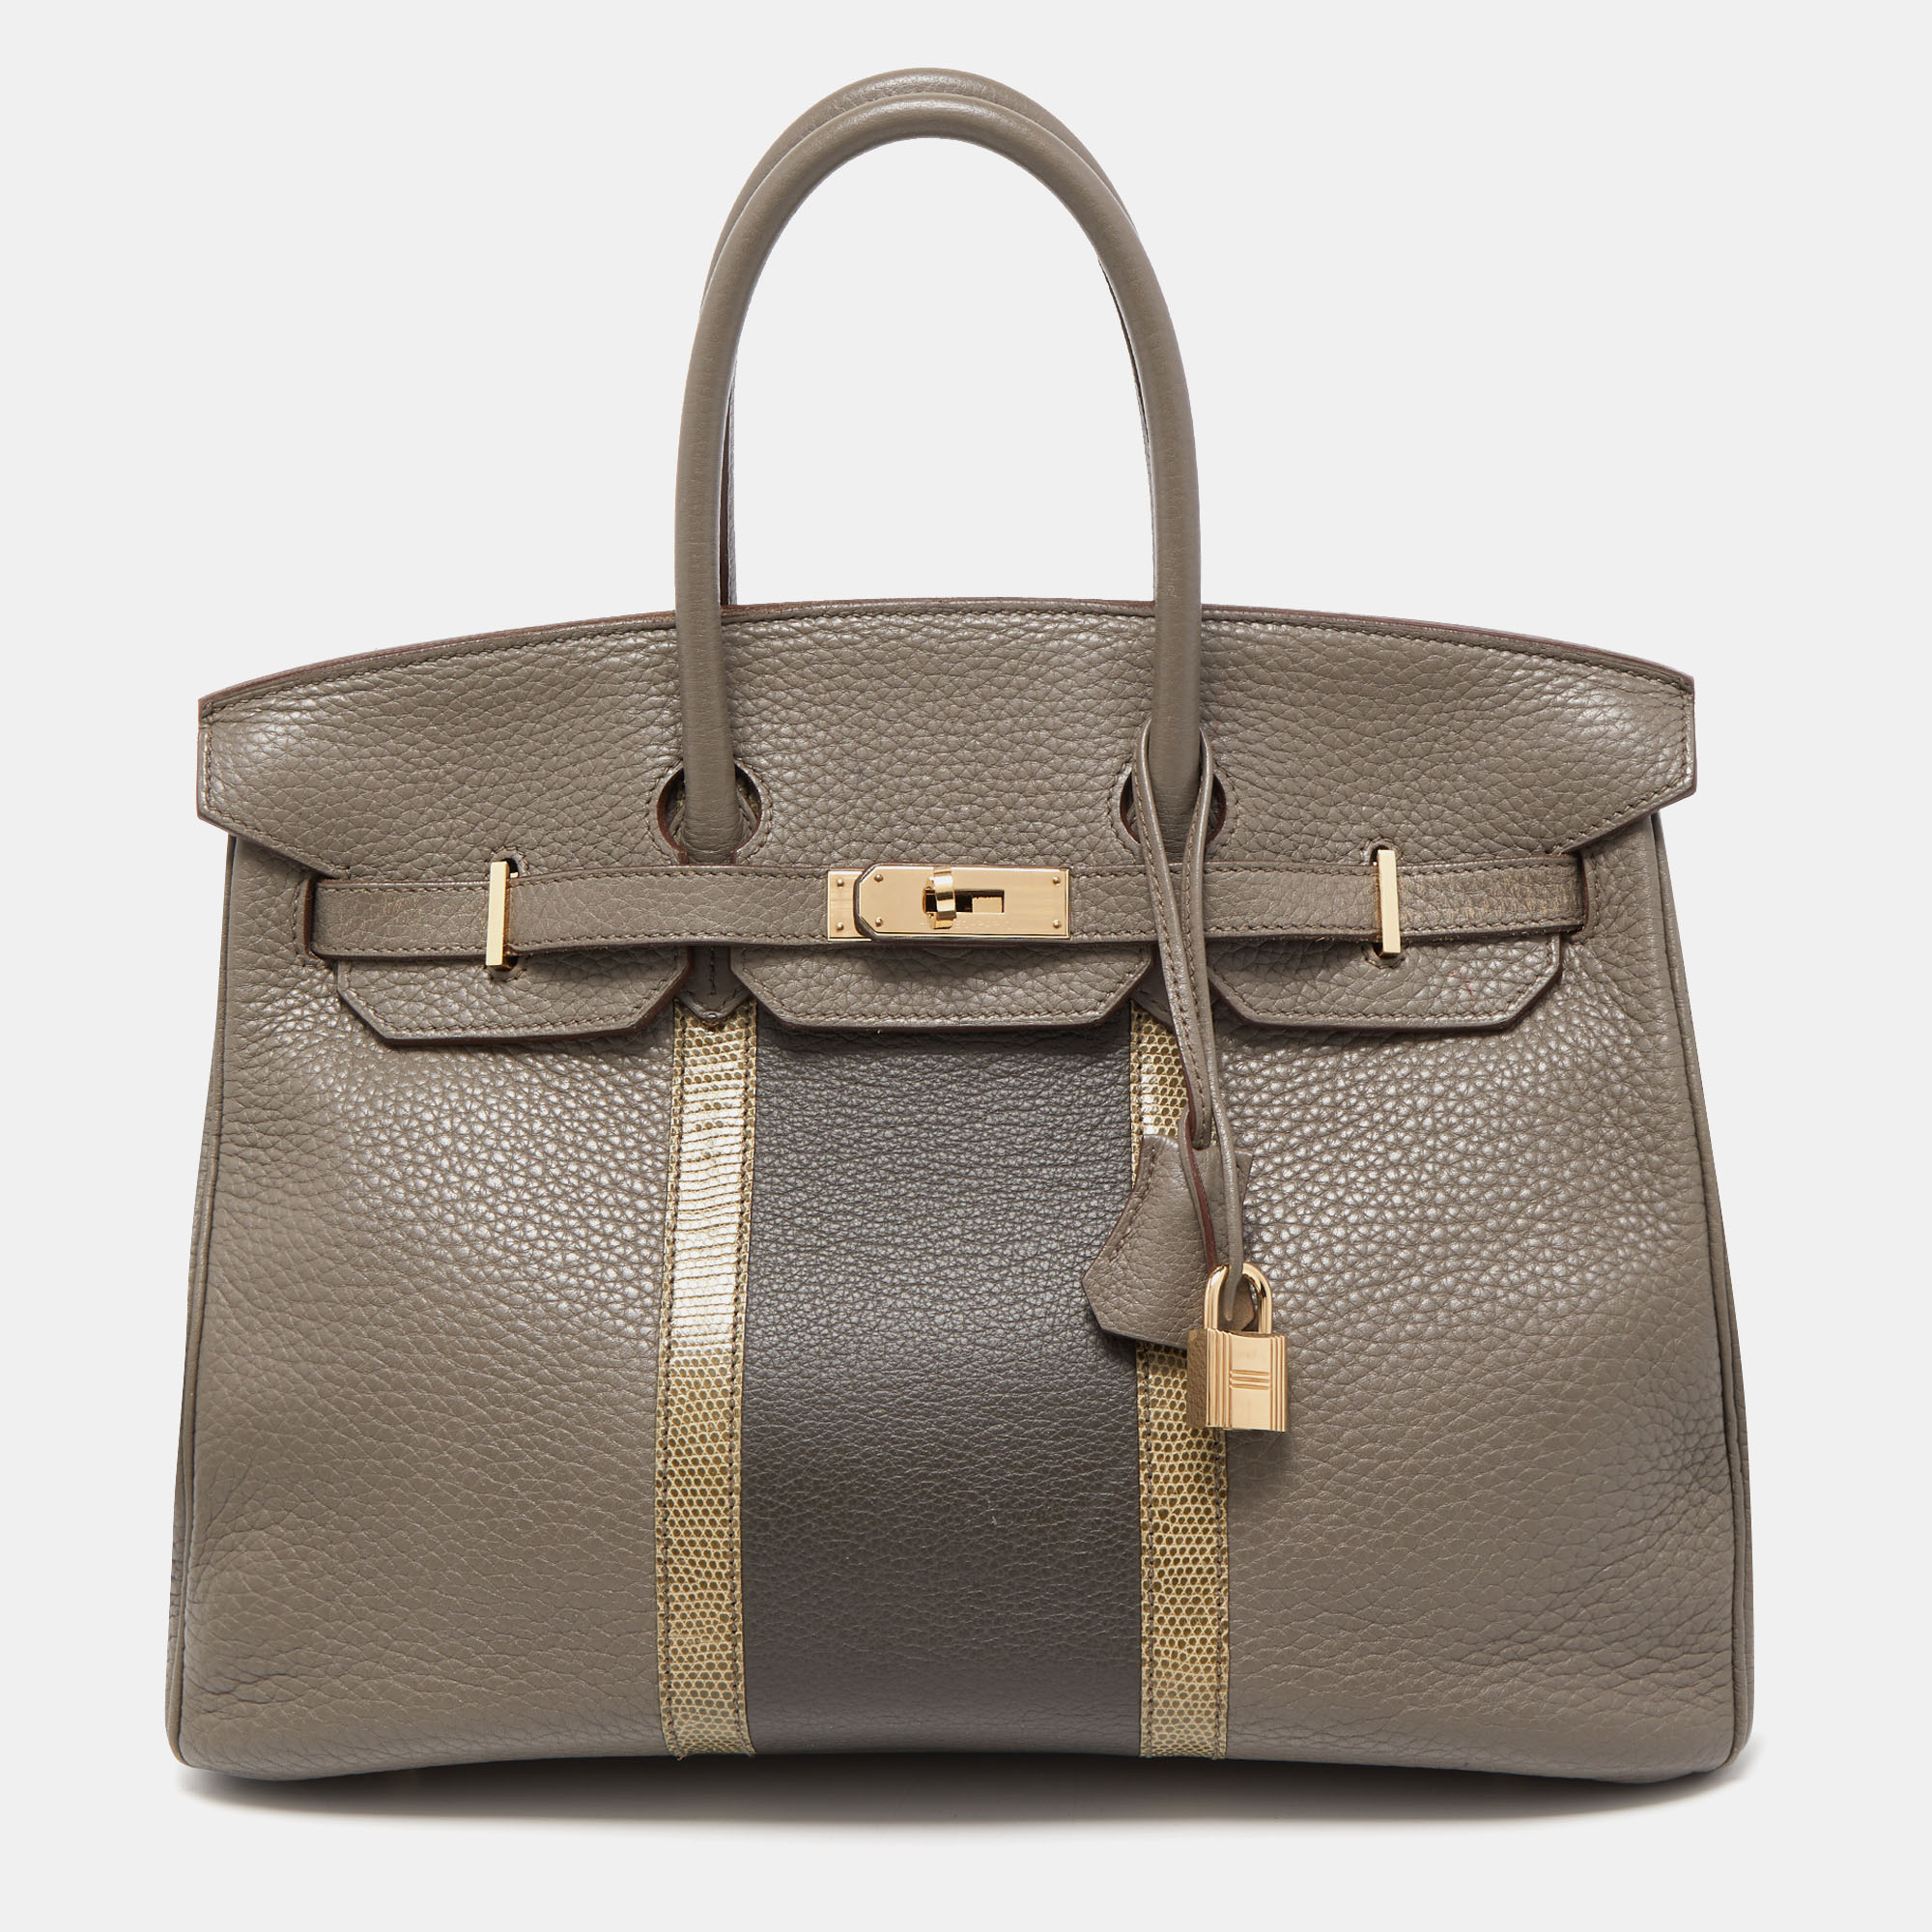 Hermès Etain/Graphite/Gris Fonce Clemence Leather and Lizard Permabrass Finish Birkin 35 Bag